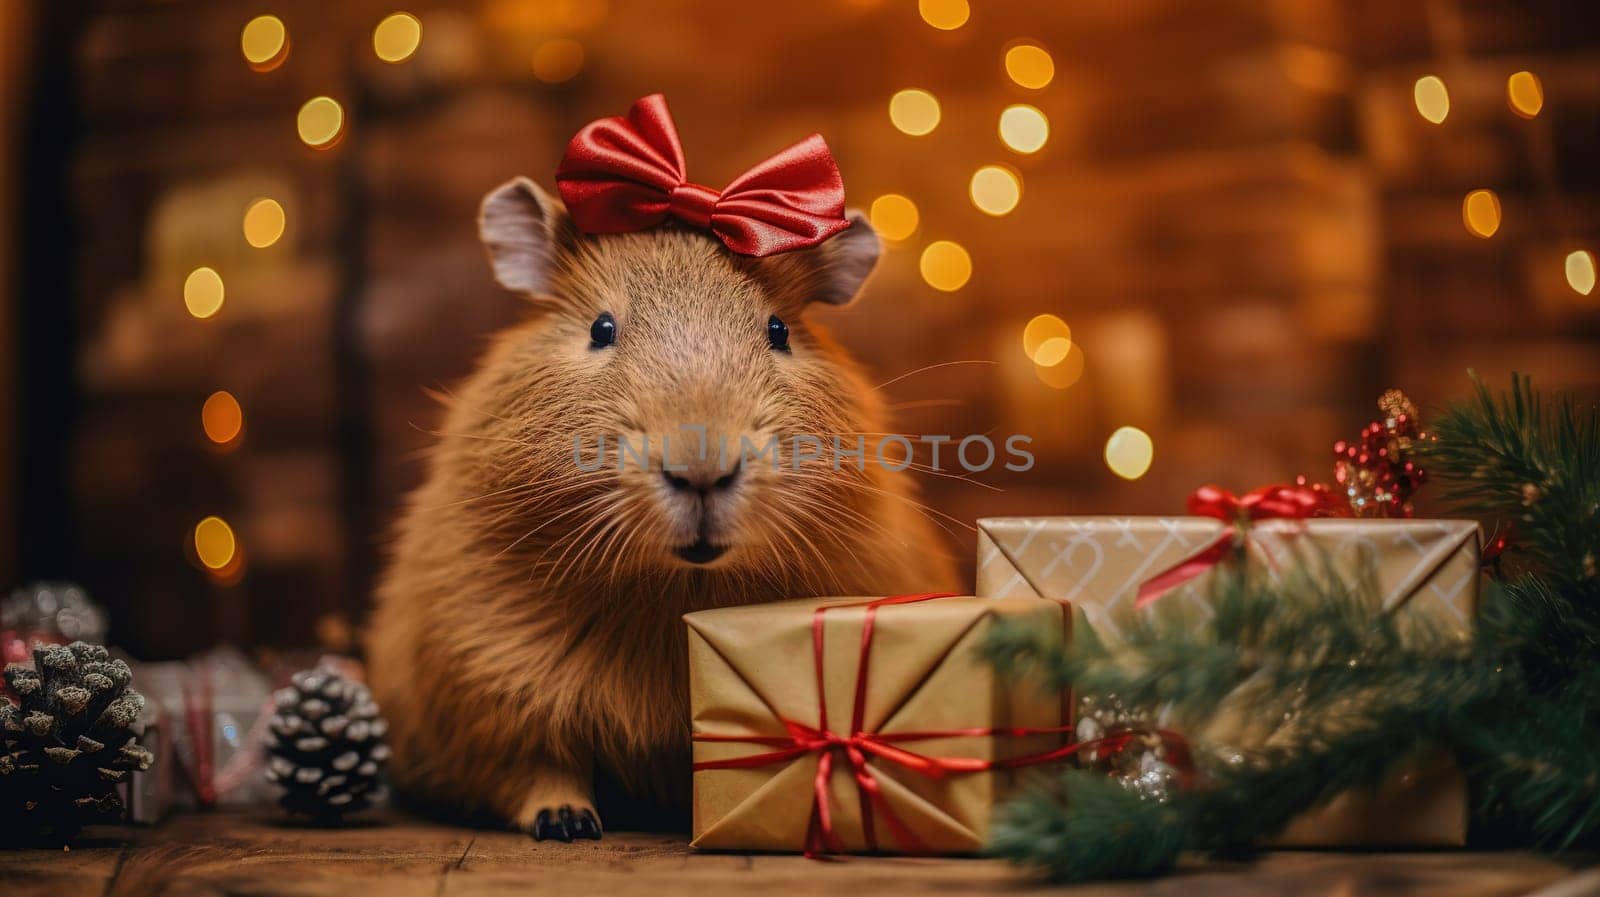 Guinea pig sits on a Christmas tree surrounded by boxes with gifts, celebrating the holiday in a family with their beloved pet, High quality photo